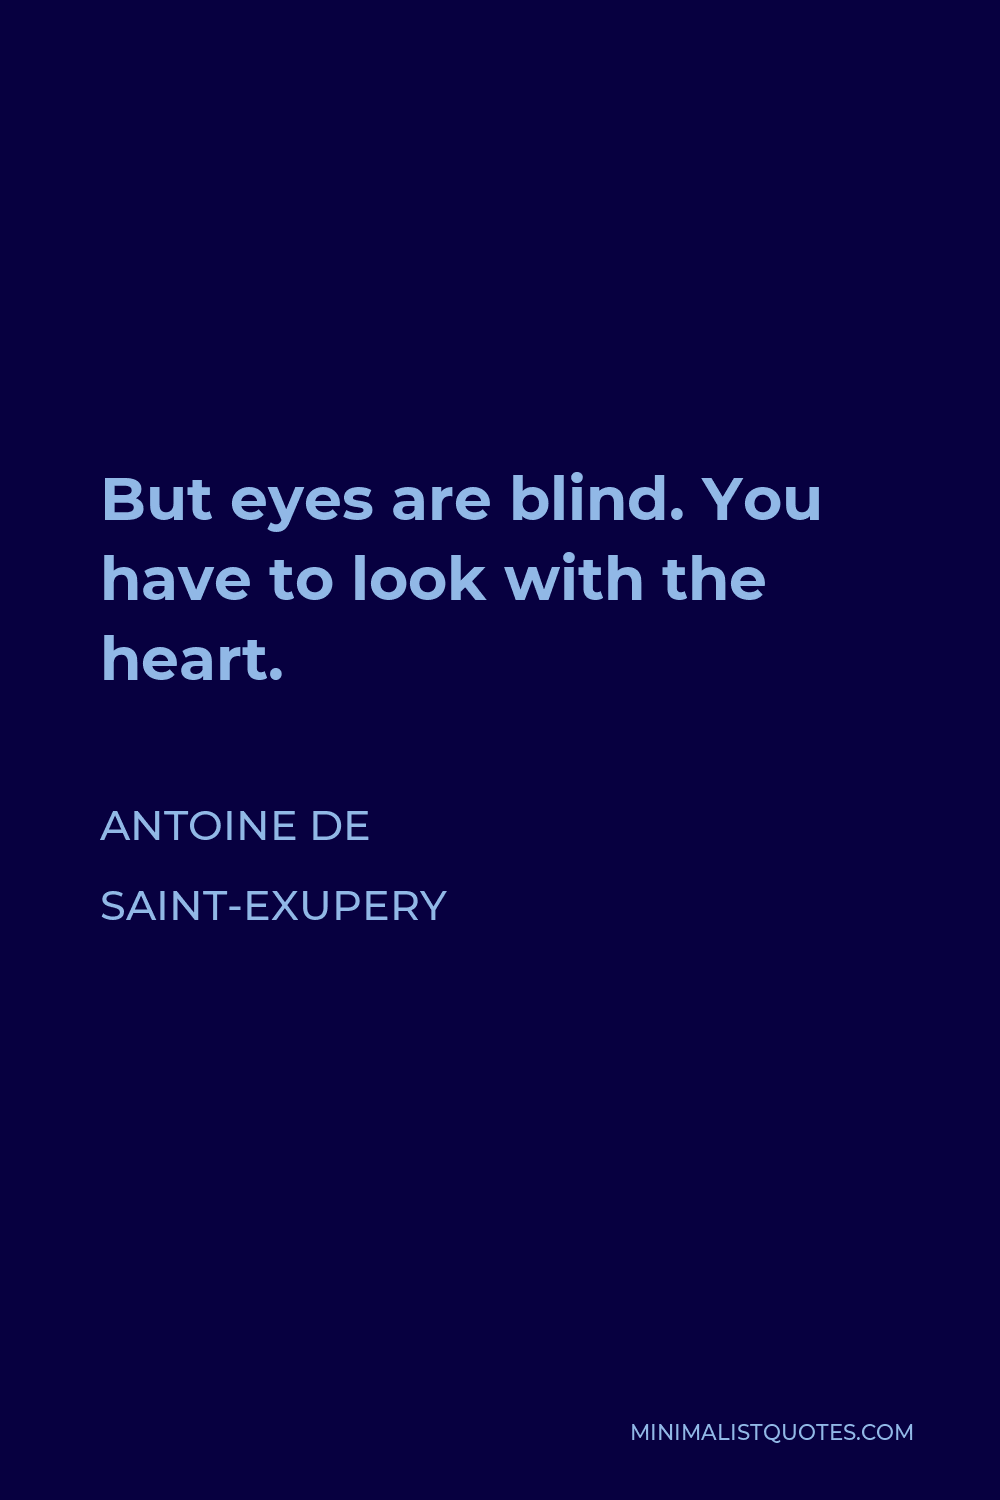 Antoine de Saint-Exupery Quote - But eyes are blind. You have to look with the heart.